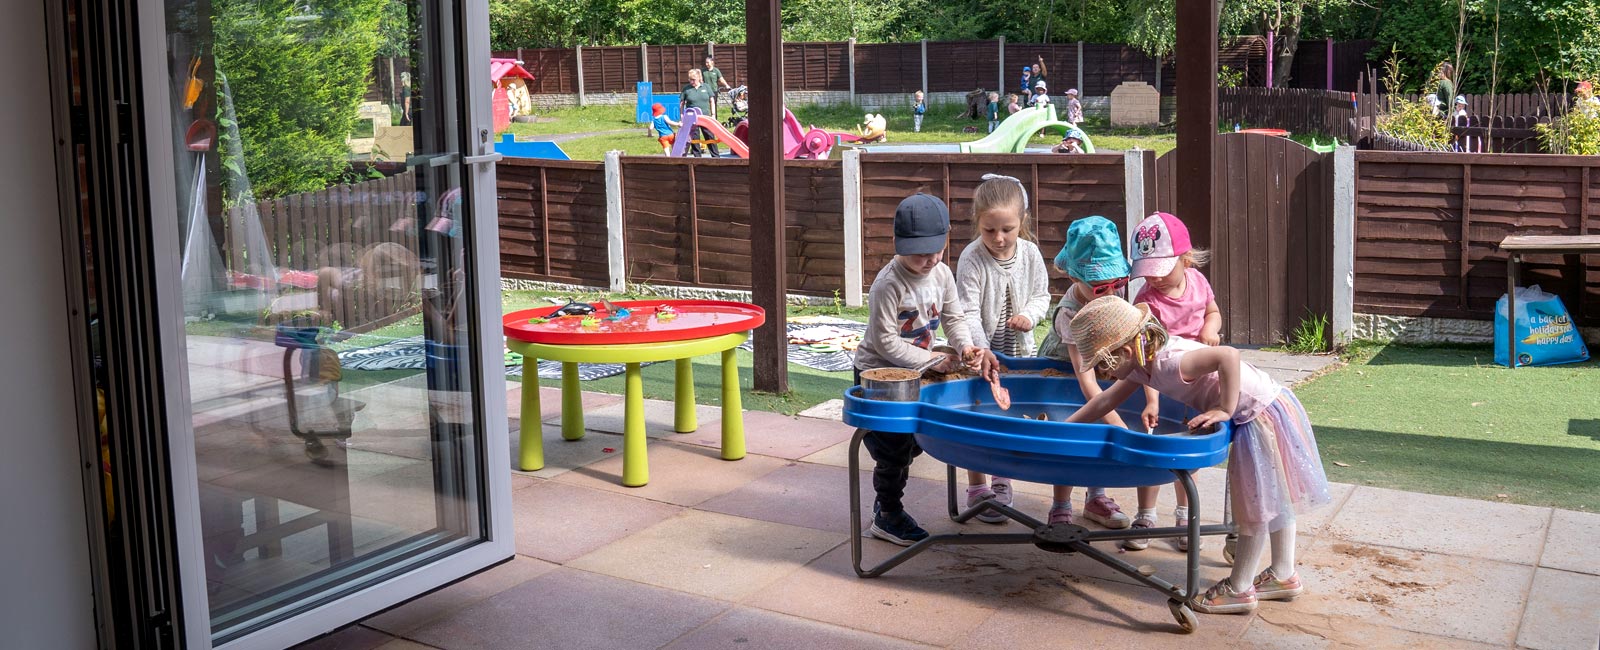 We offer high quality childcare in Hindley Green, Wigan, near Bickershaw, Leigh, Atherton, Westhoughton, Ince-in-Makerfield, Platt Bridge, Tyldesley, Bolton & Manchester.